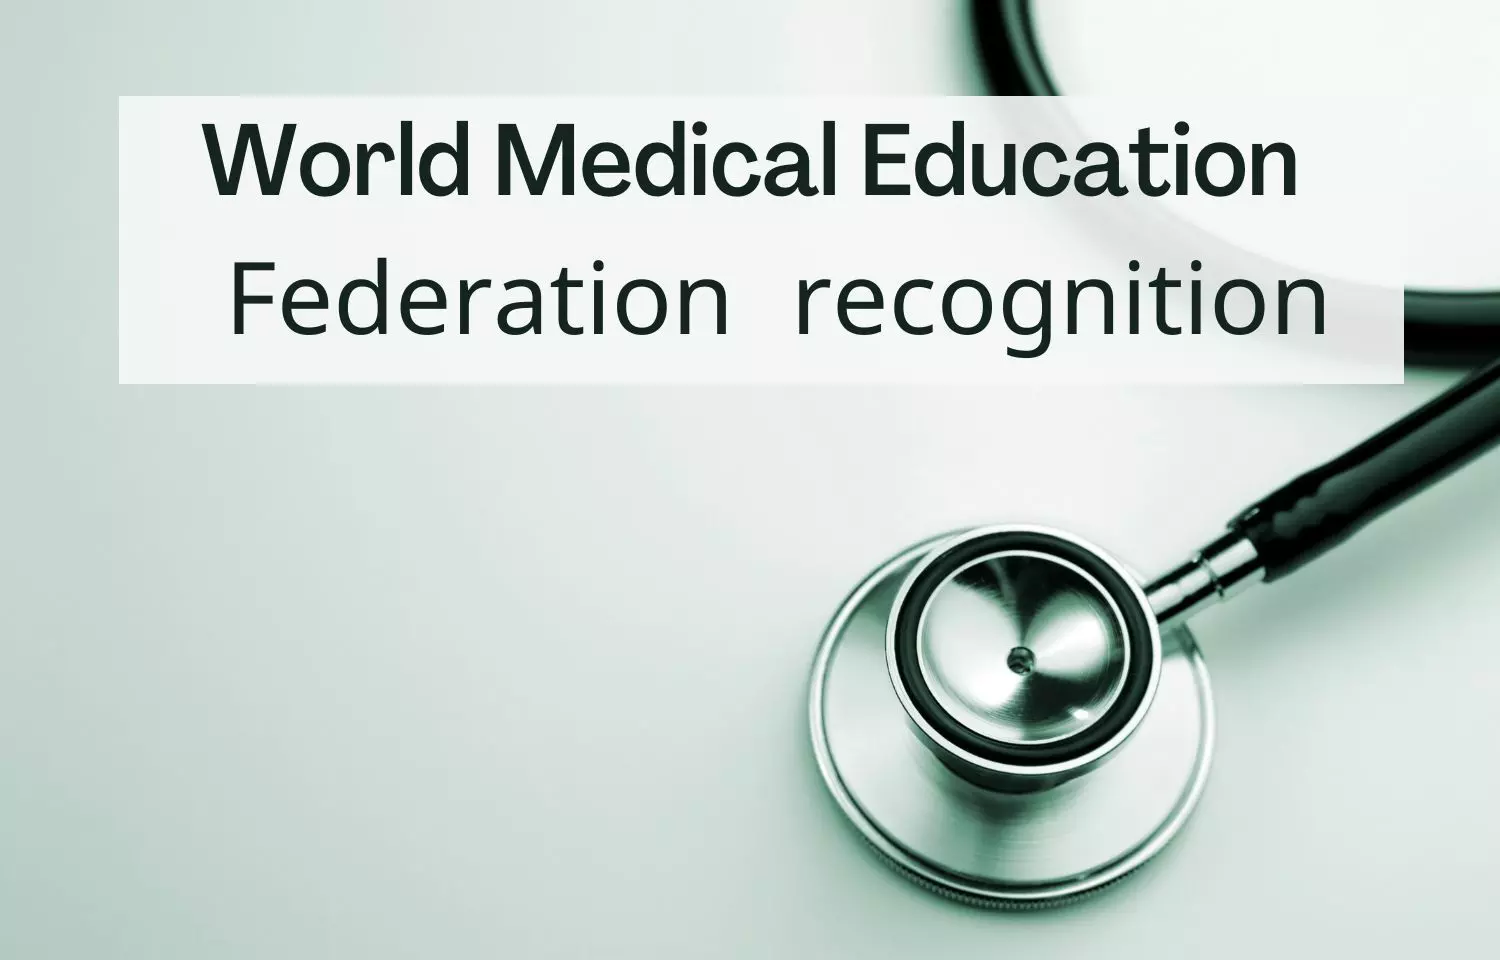 PG Medicine Abroad: NMC applies to WMFE seeking global recognition for Indian Medical Colleges